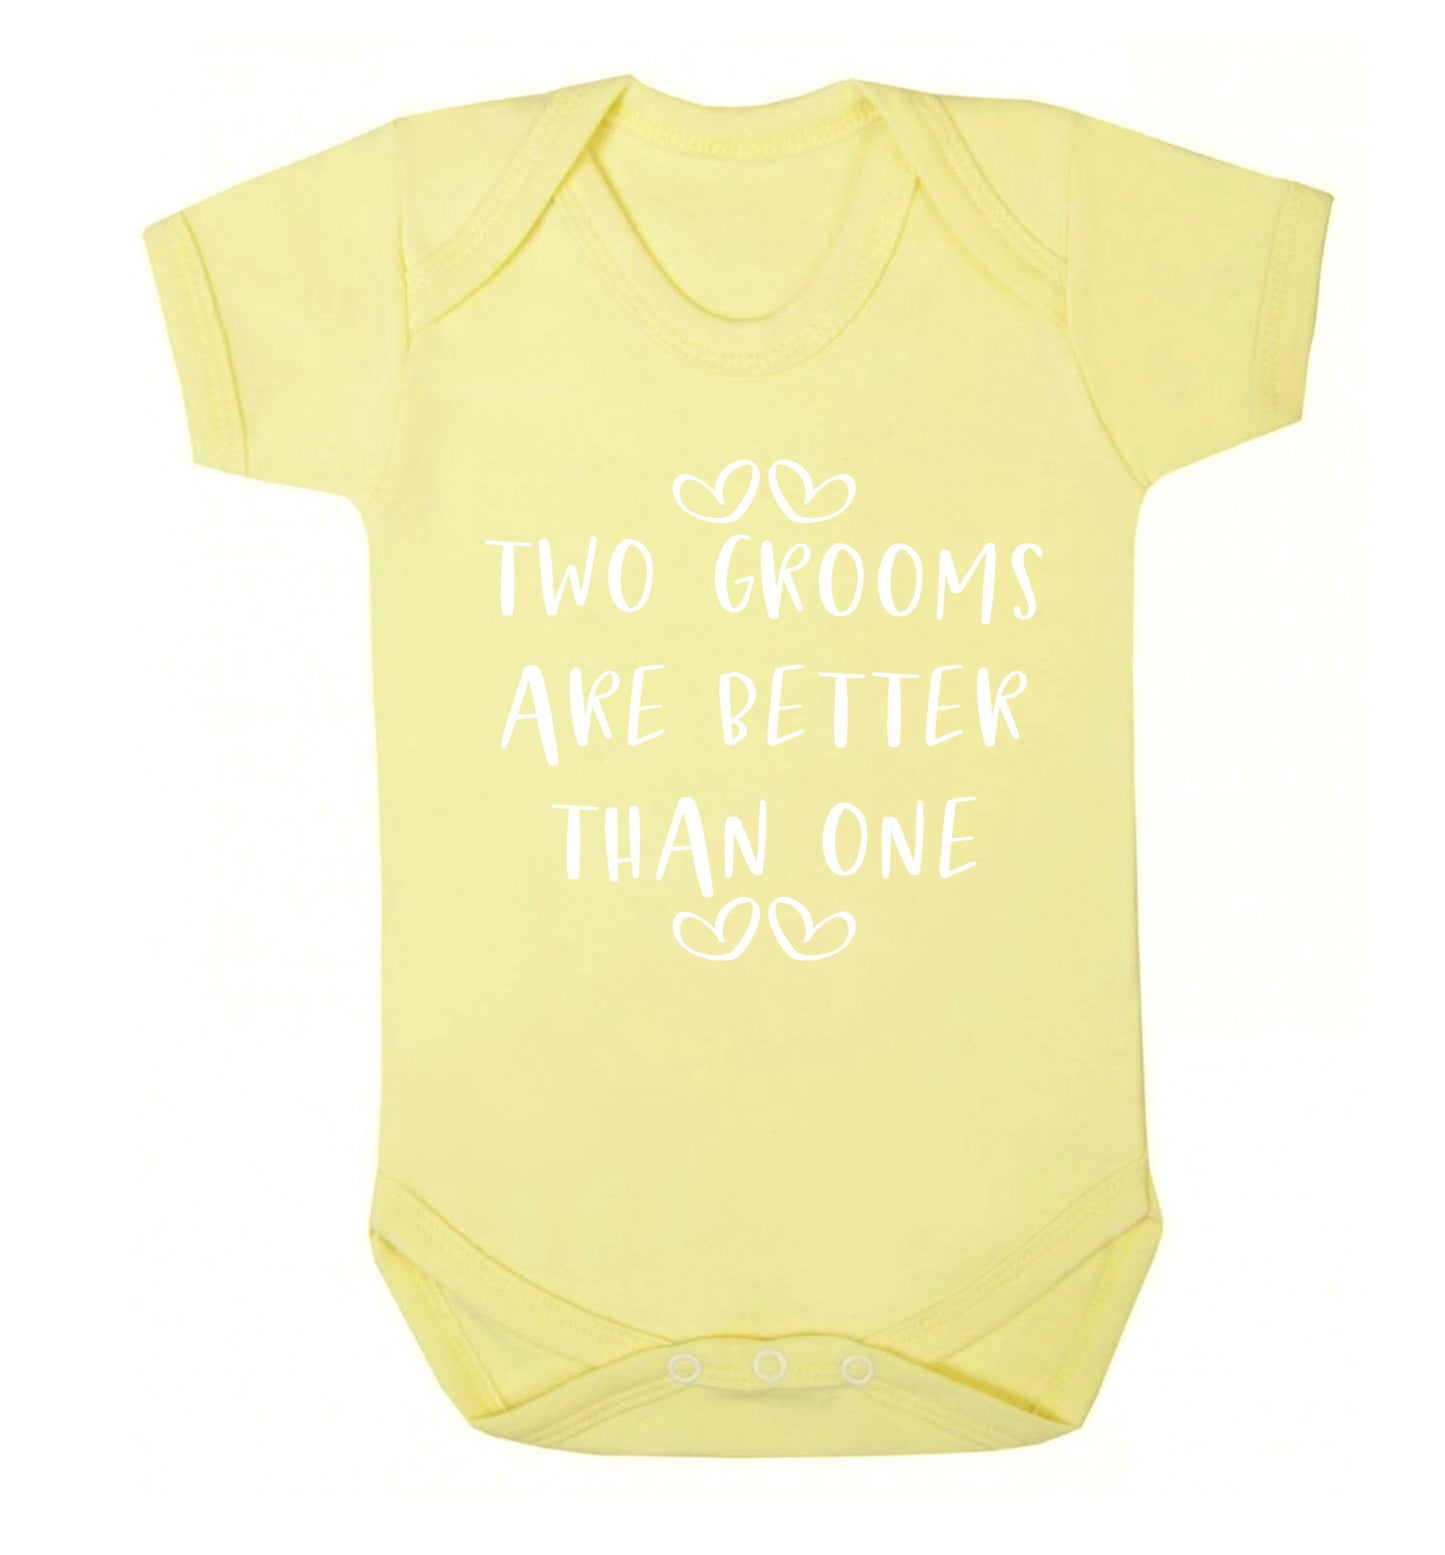 Two grooms are better than one baby vest pale yellow 18-24 months